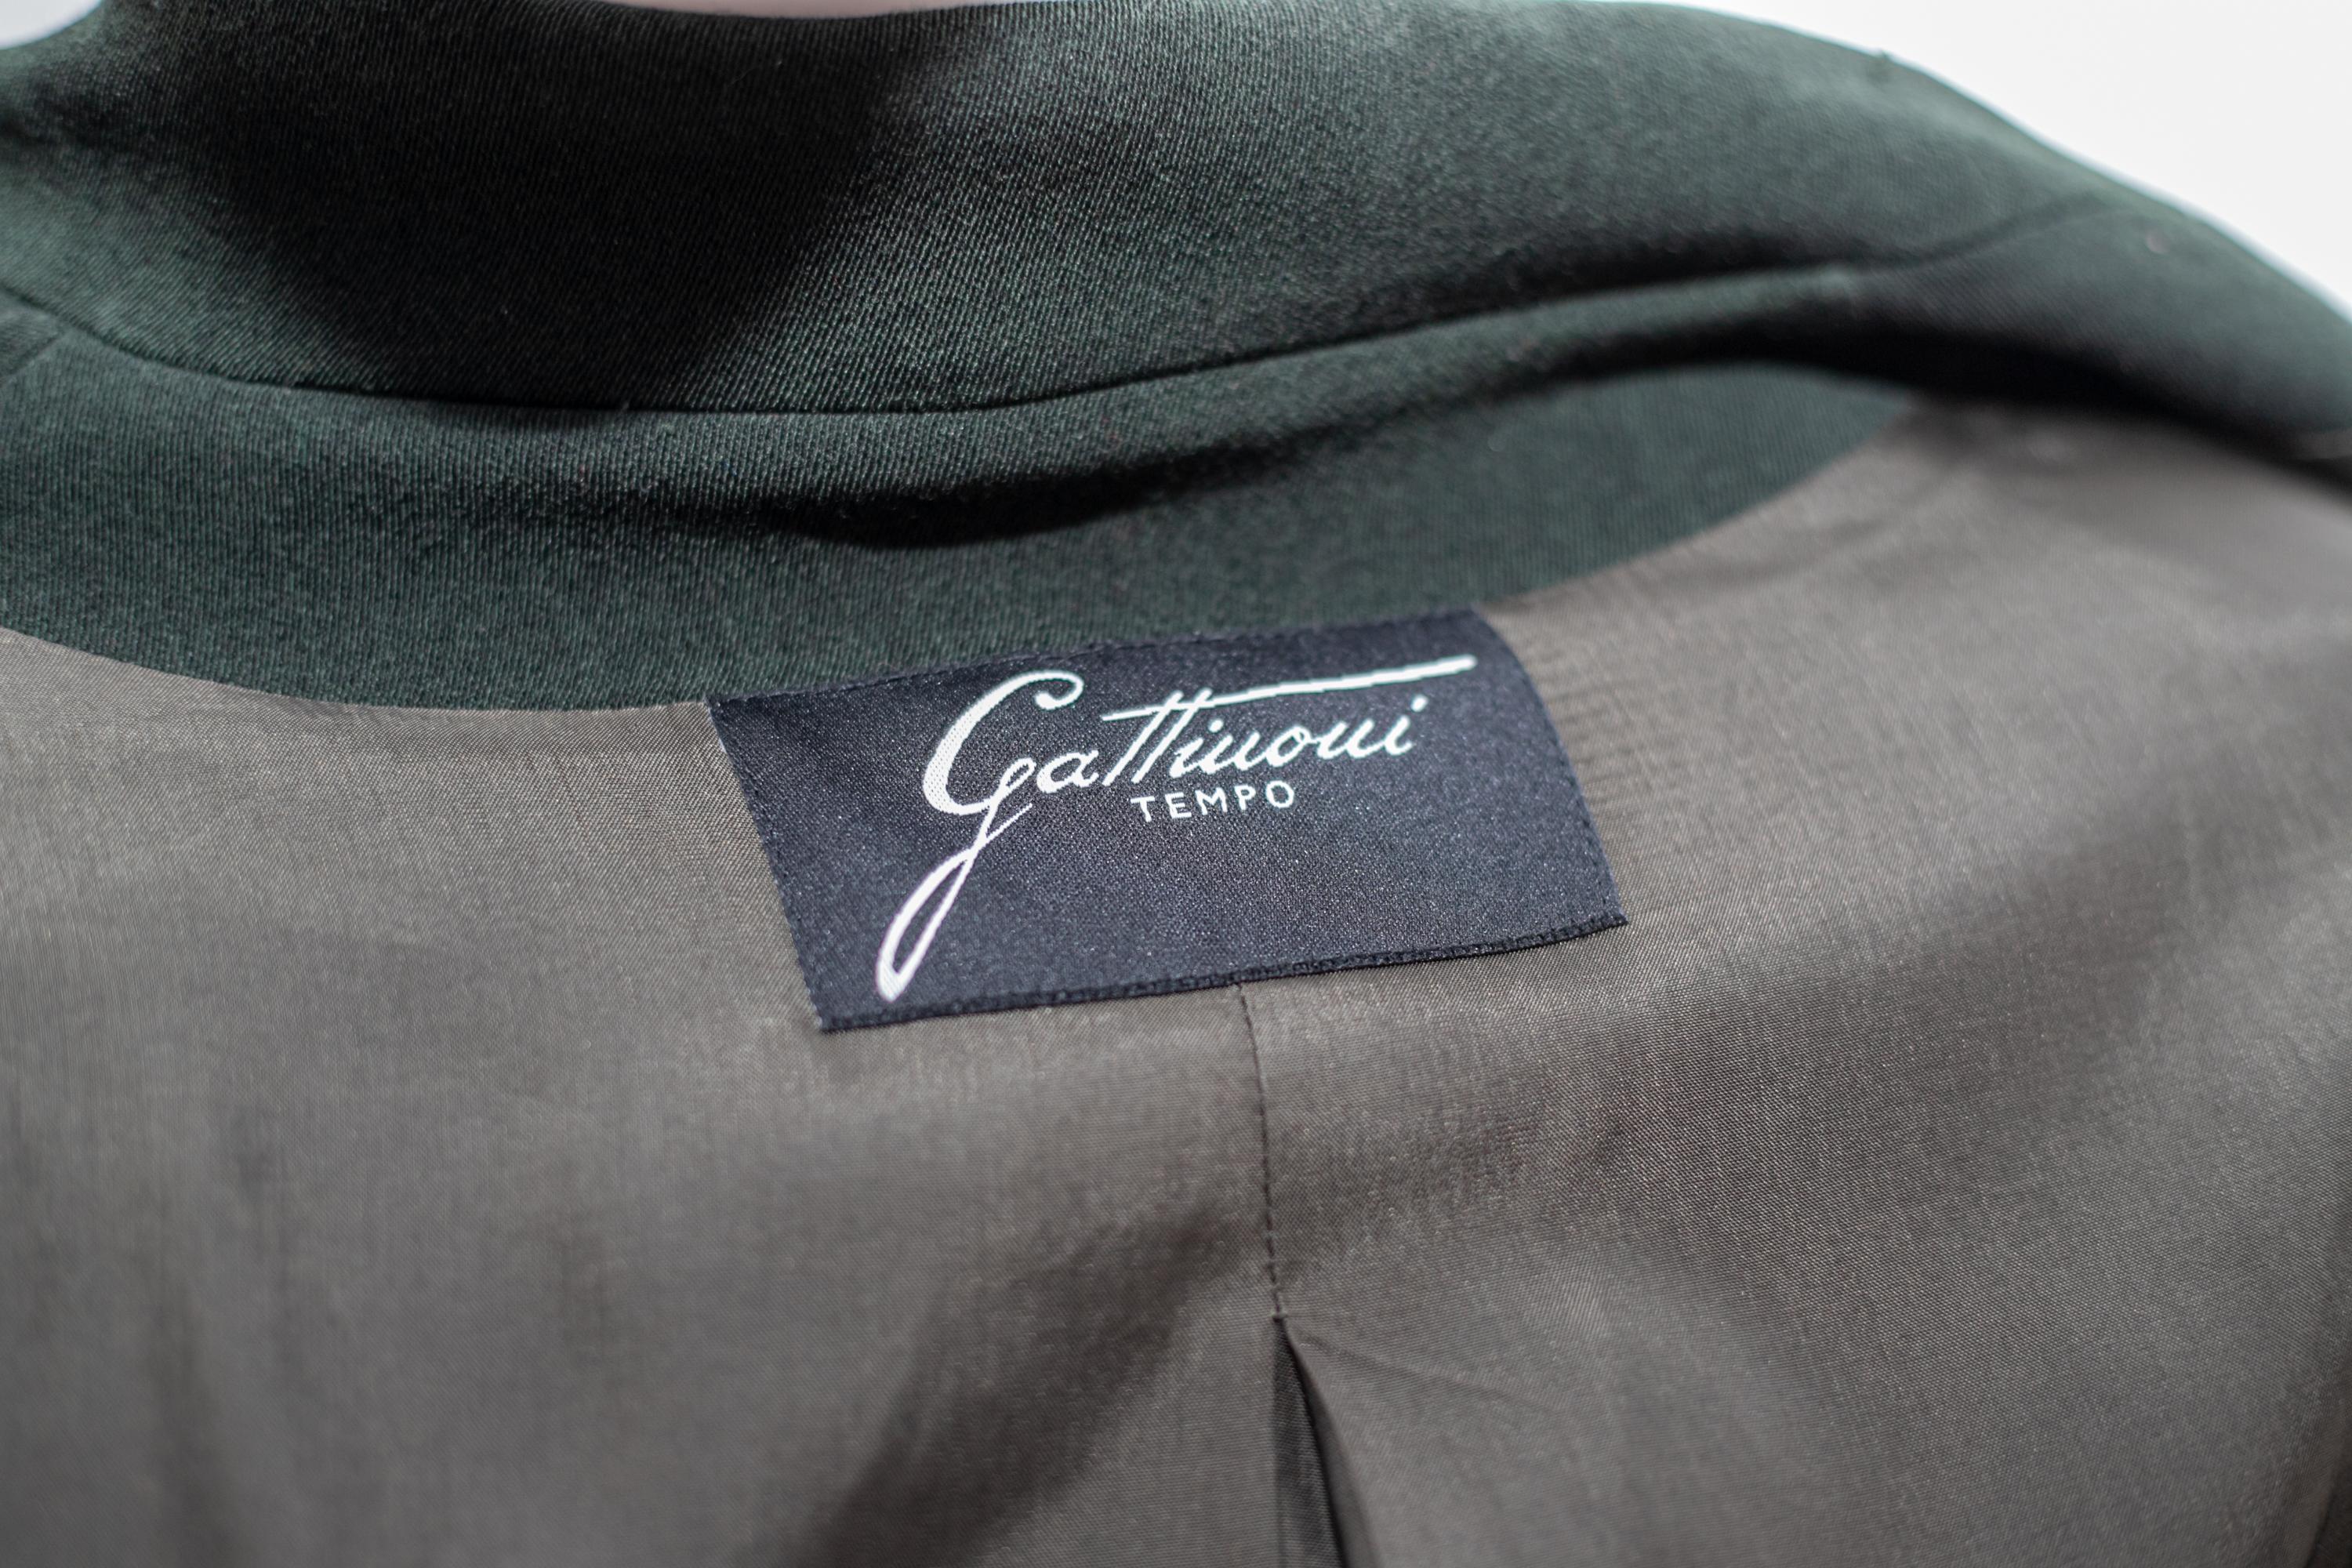 Beautiful elegant wool shirt by Gattinoni from the 1980s, made in Italy.
ORIGINAL LABEL.
The jacket is totally made of green wool and has long sleeves with soft cuffs. The collar has a classic small list cut. There are 3 large round buttons,